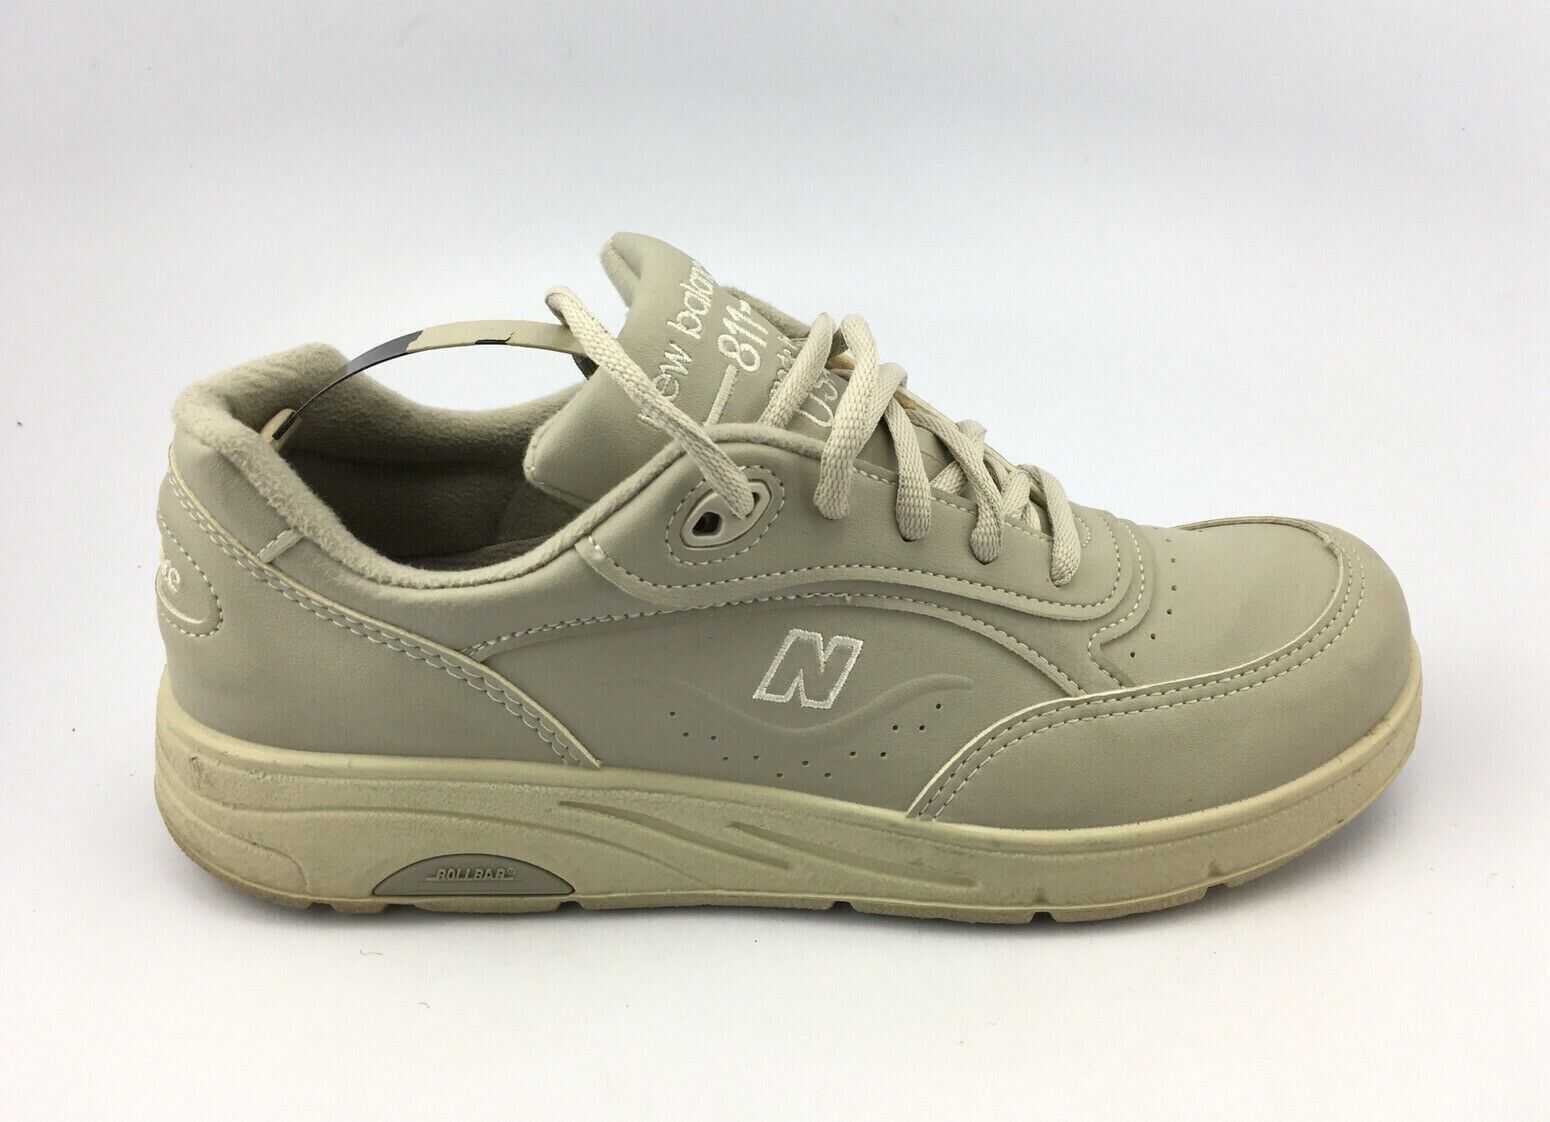 new balance womens walking shoes with roll bar